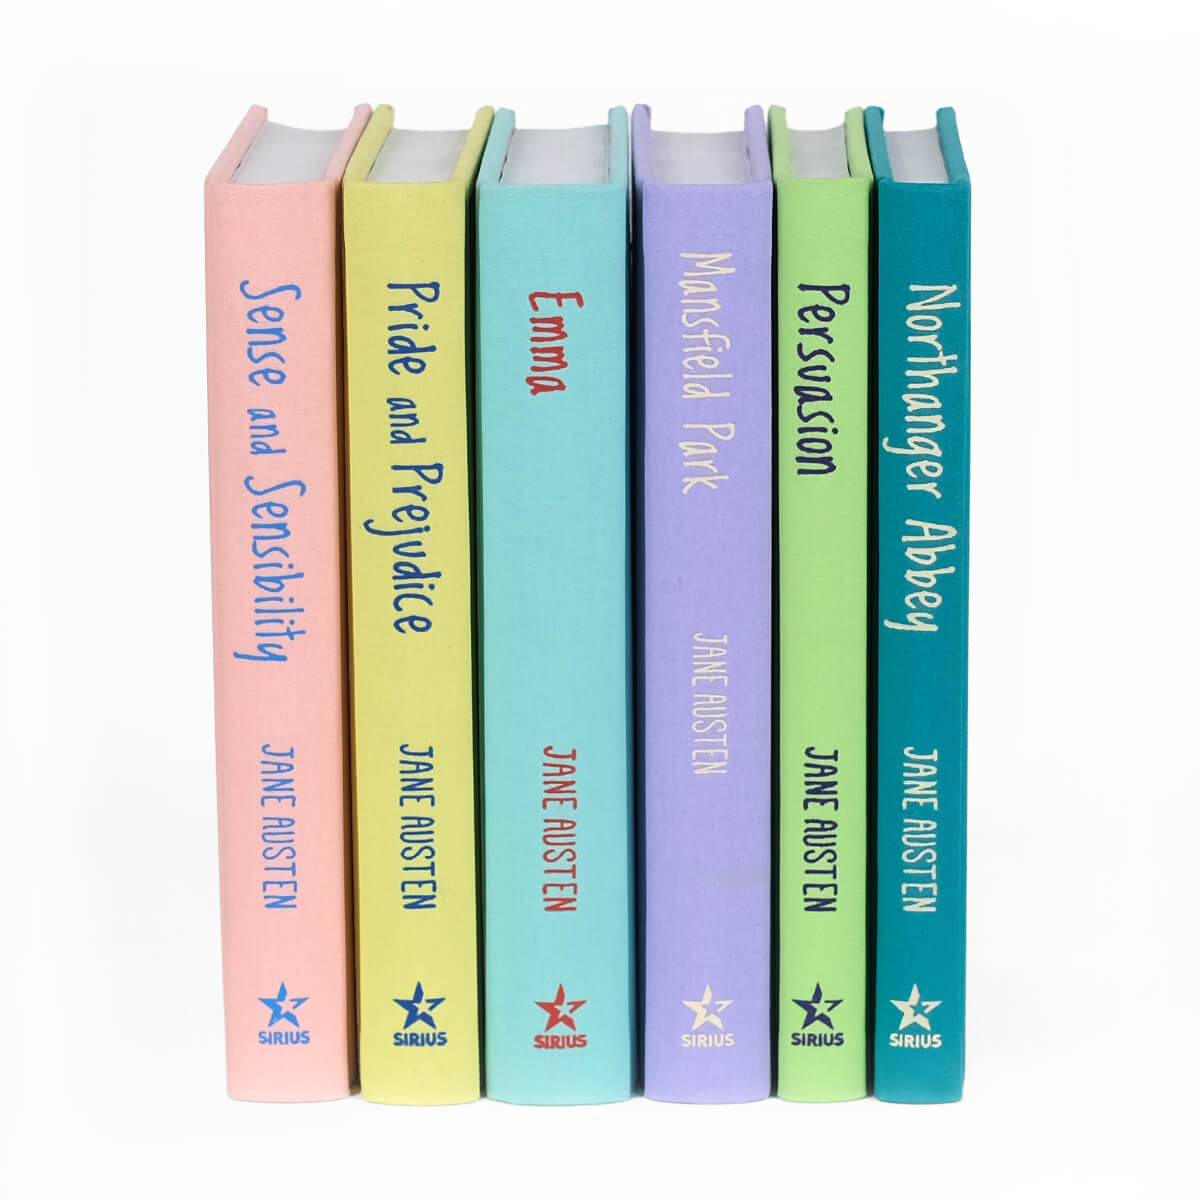 Unjacketed books in the Jane Austen Obvious State set. Pastel book spines in pink, yellow, blue, purple, green, dark blue with title and author down the spine.